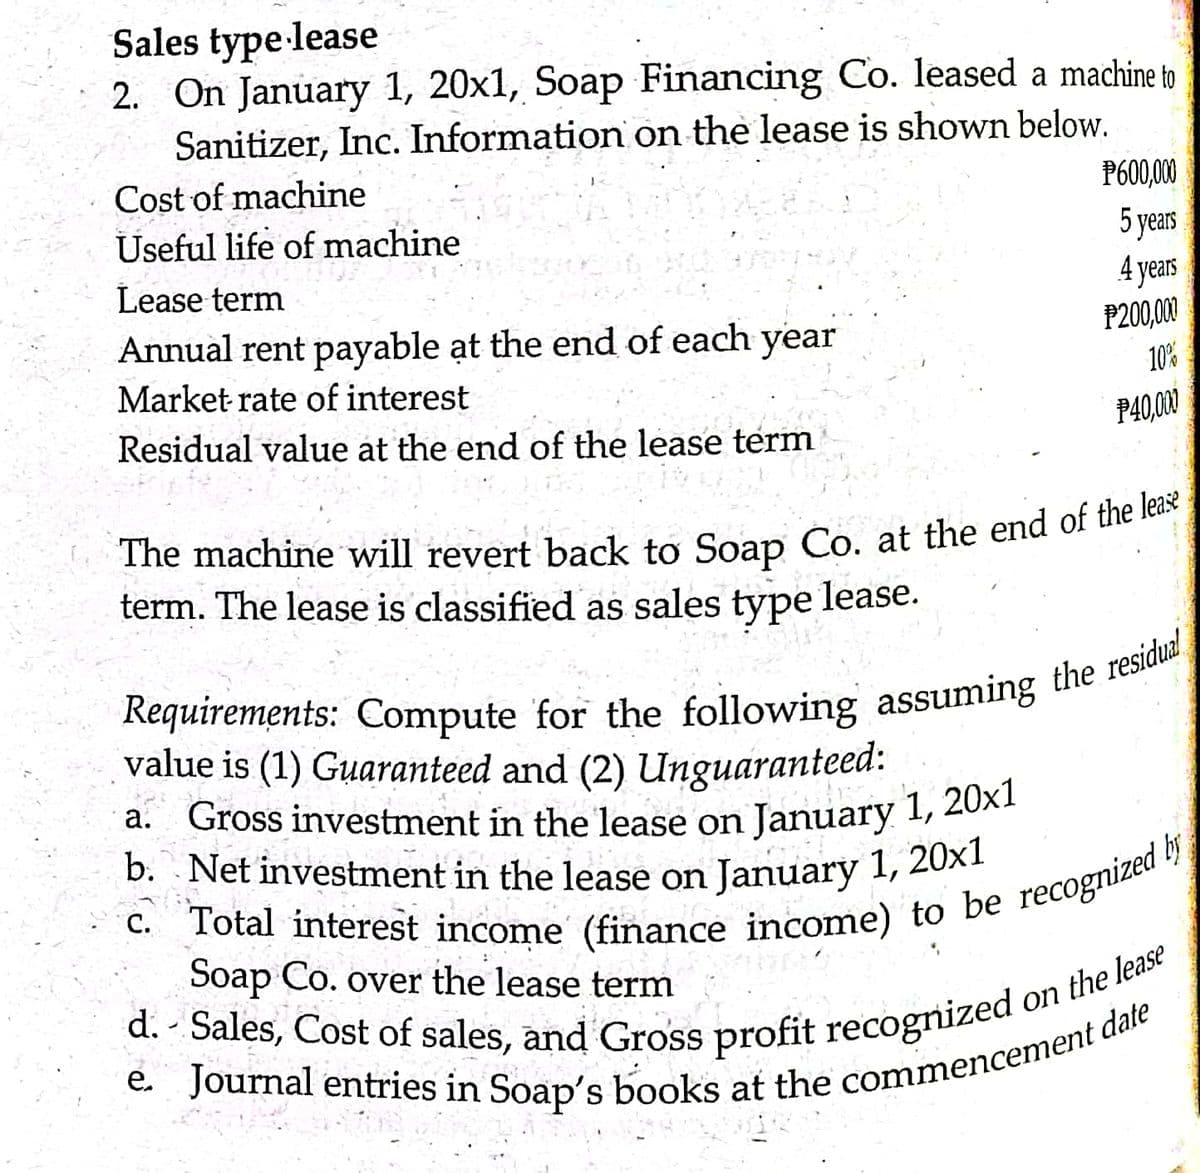 b. Net investment in the lease on January 1, 20x1
d. - Sales, Cost of sales, and Gross profit recognized o
Sales type lease
2. On January 1, 20x1, Soap Financing Co. leased a machine to
Sanitizer, Inc. Information on the lease is shown below.
Cost of machine
P600,00
Useful life of machine
5 years
4 years
Lease term
Annual rent payable ạt the end of each year
P200,00
Market rate of interest
10%
Residual value at the end of the lease term
P40,000
term. The lease is classified as sales type lease.
value is (1) Guaranteed and (2) Unguaranteed:
a. Gross investment in the lease on
January 1, 20x1
b. Net investment in the lease on January 1, 20×1
Soap Co. over the lease term
on the lease
E. Journal entries in Soap's books at the commencemen
